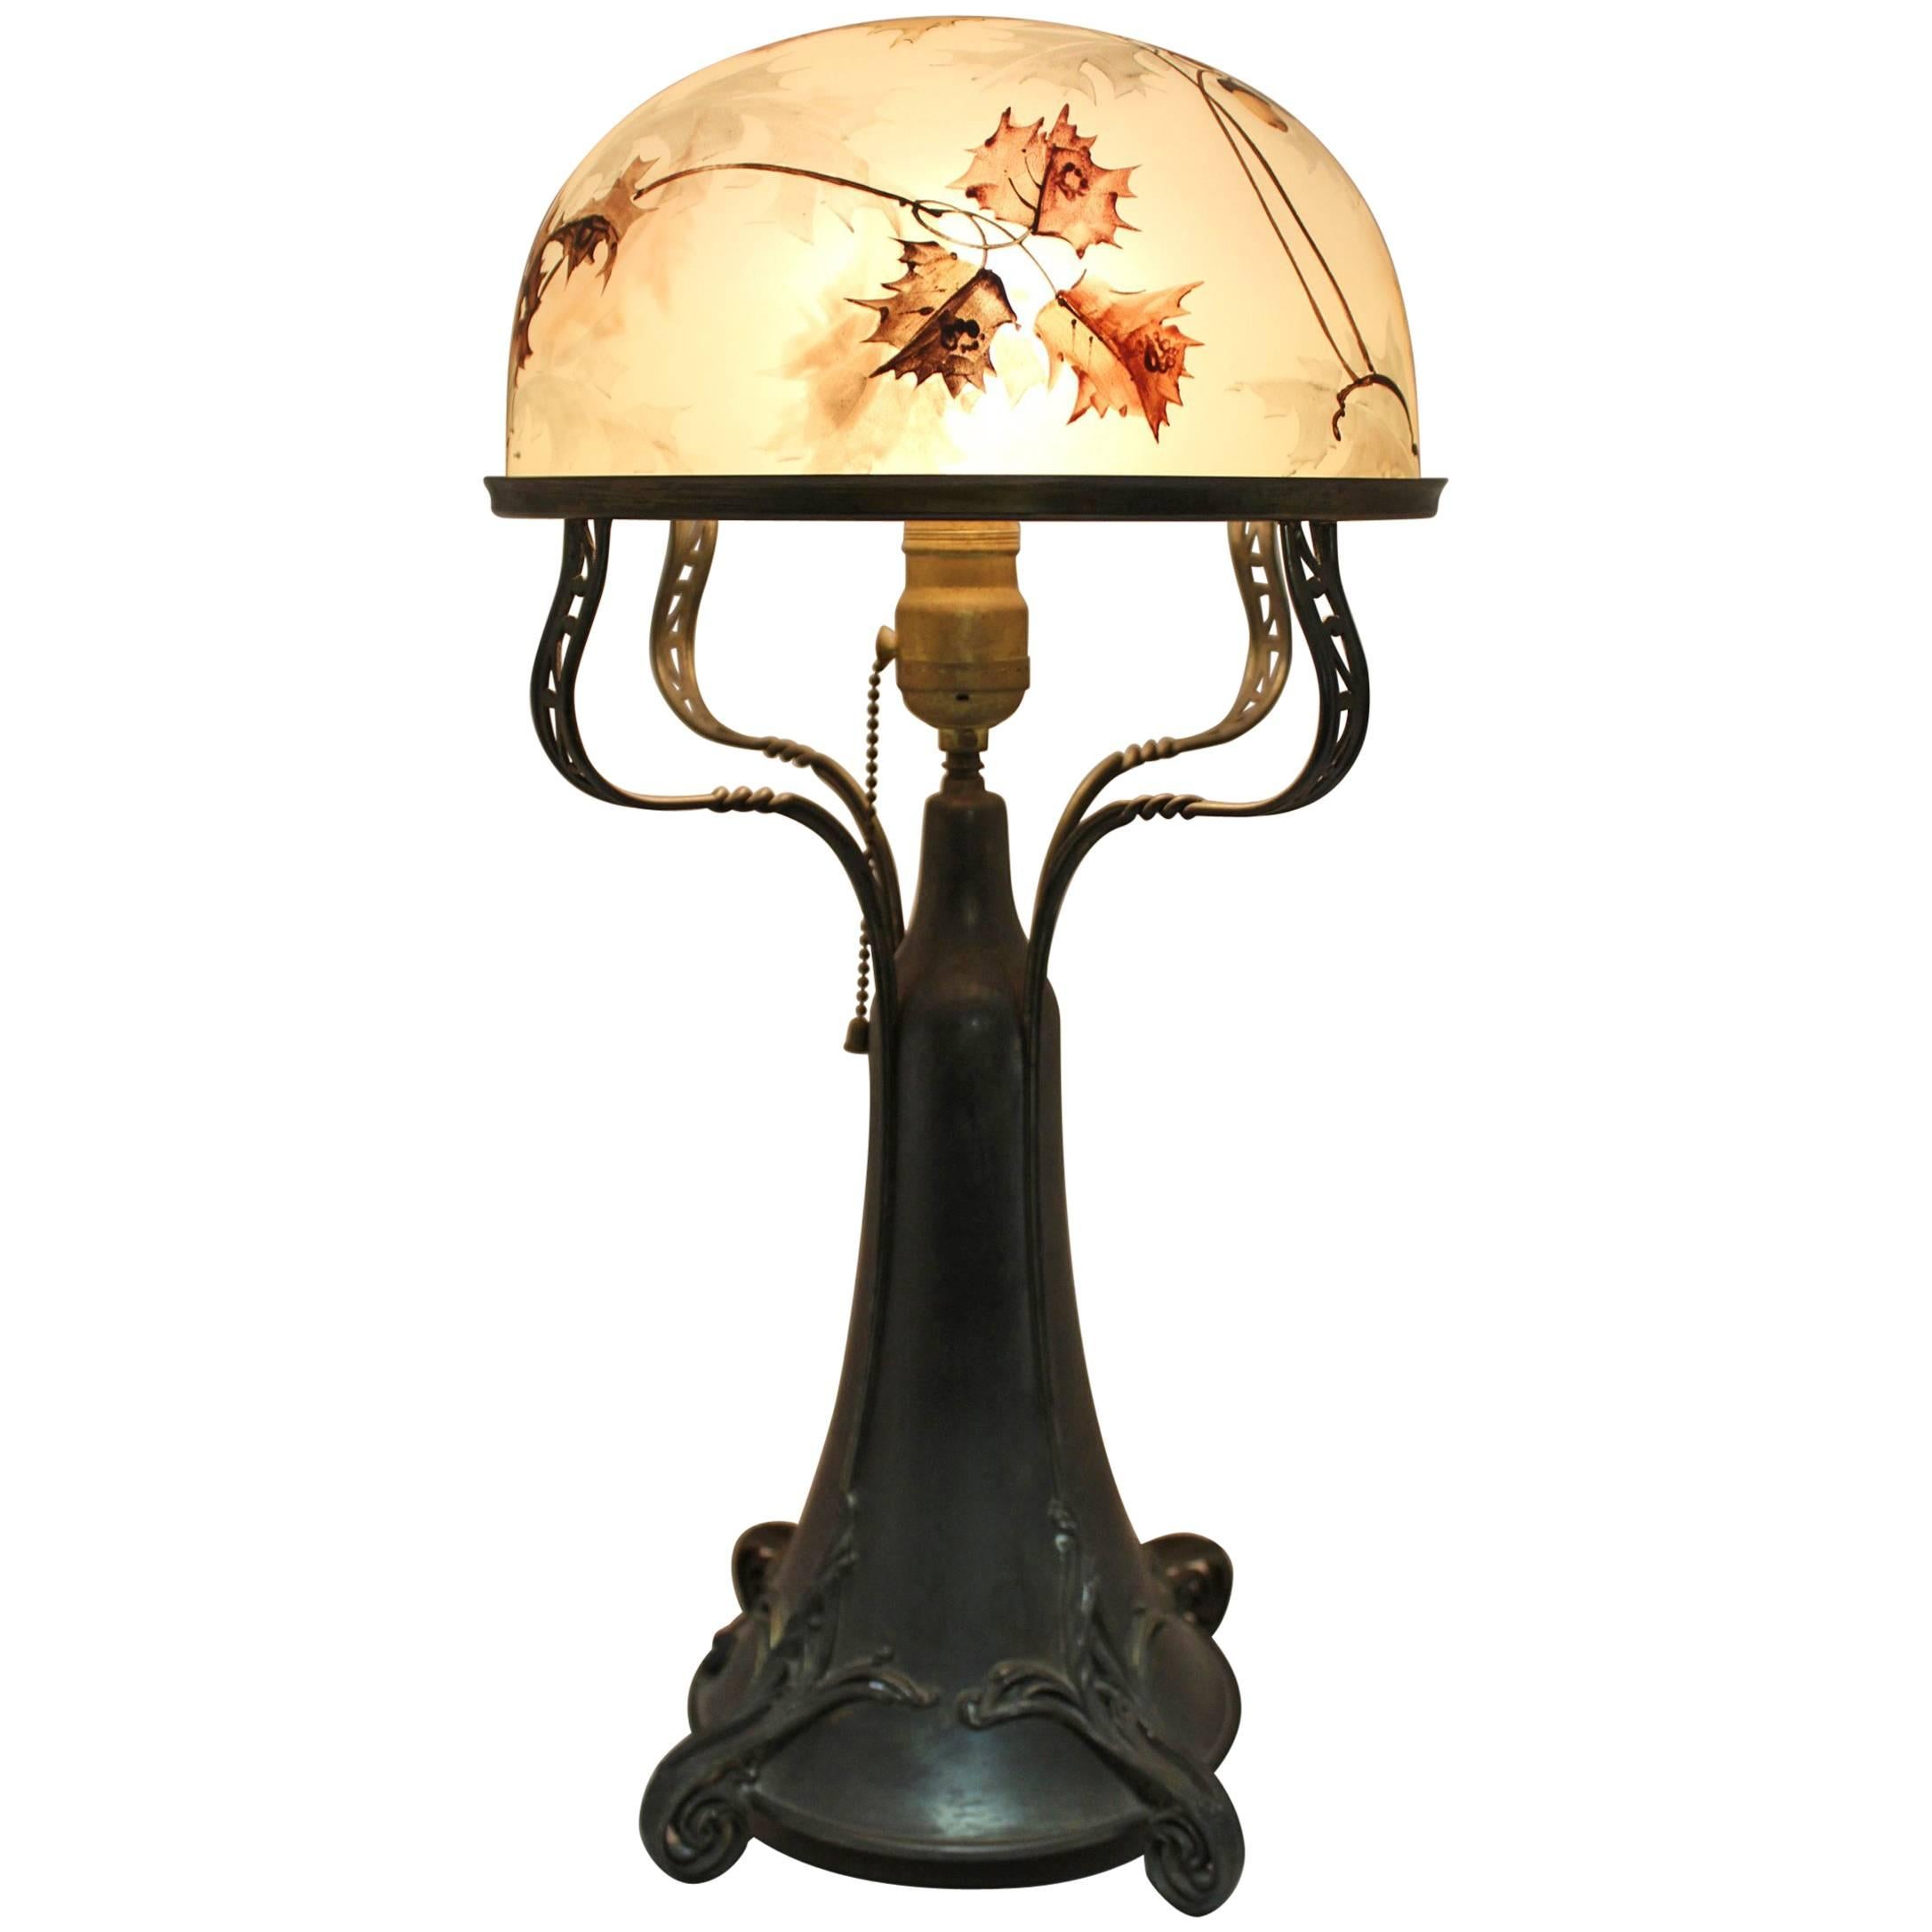 Art Nouveau Pairpoint Dome Shade Table Lamp with Oak Leaf and Acorn Motif